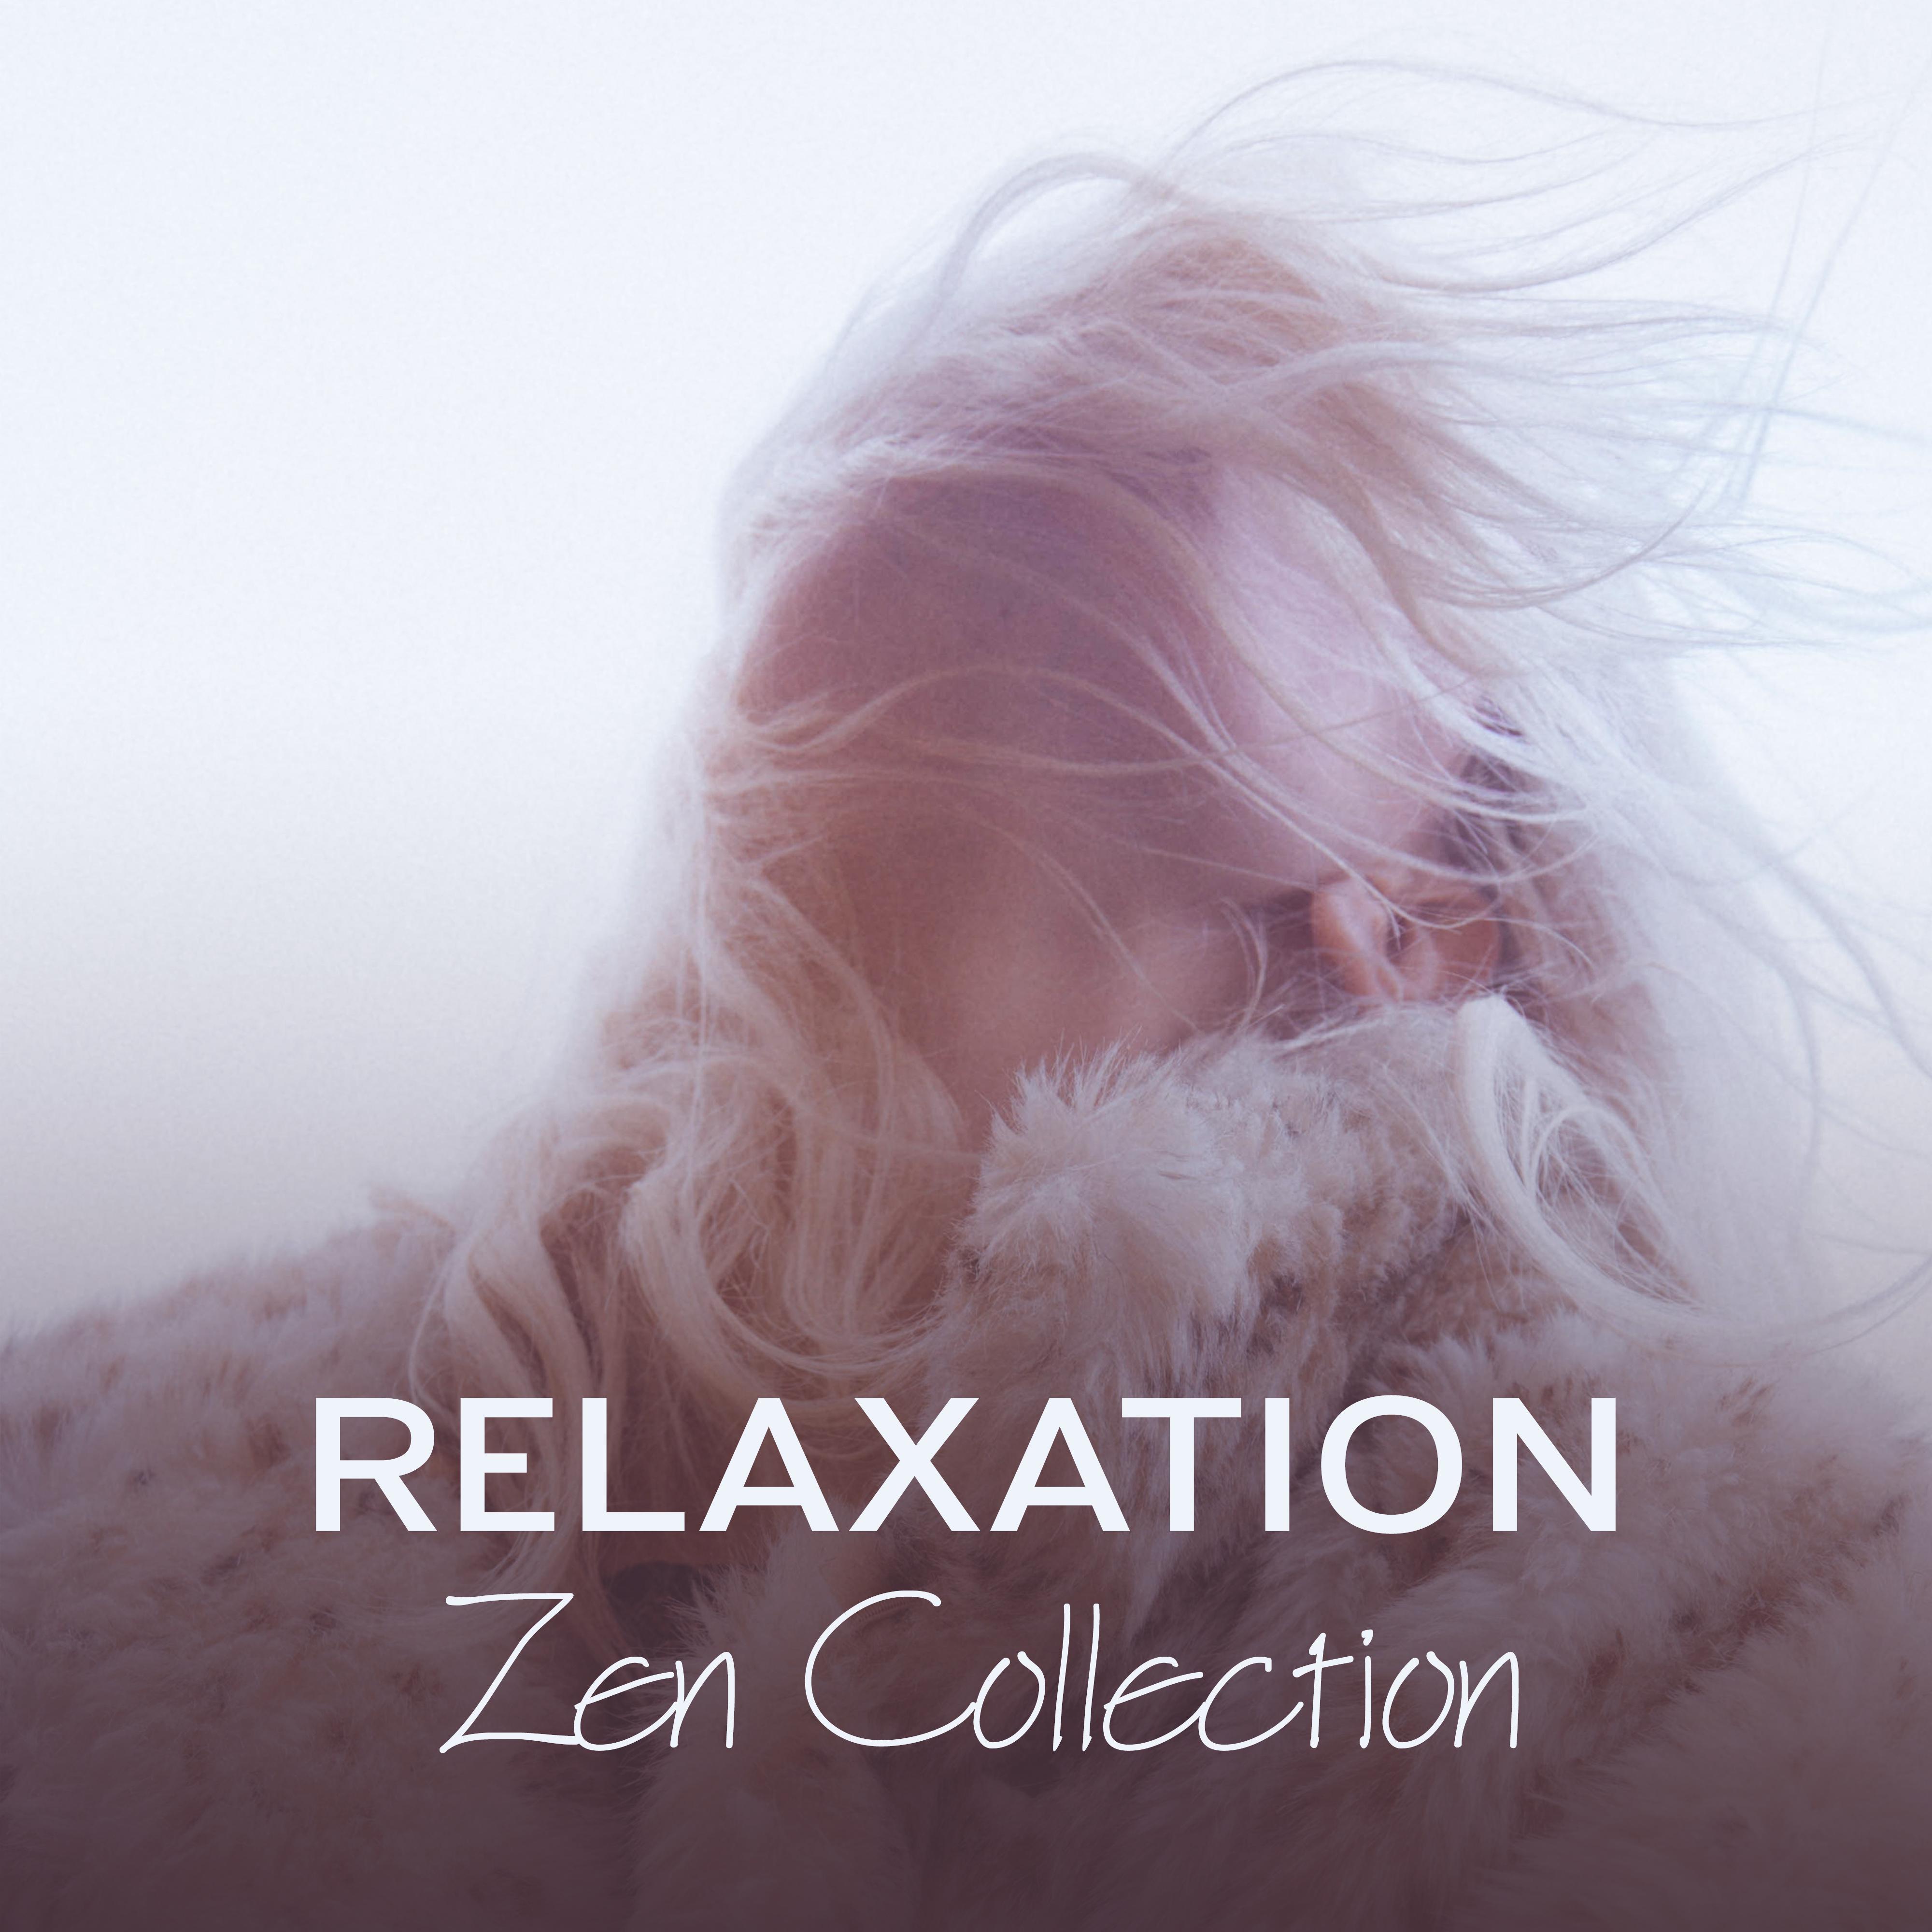 Relaxation Zen Collection